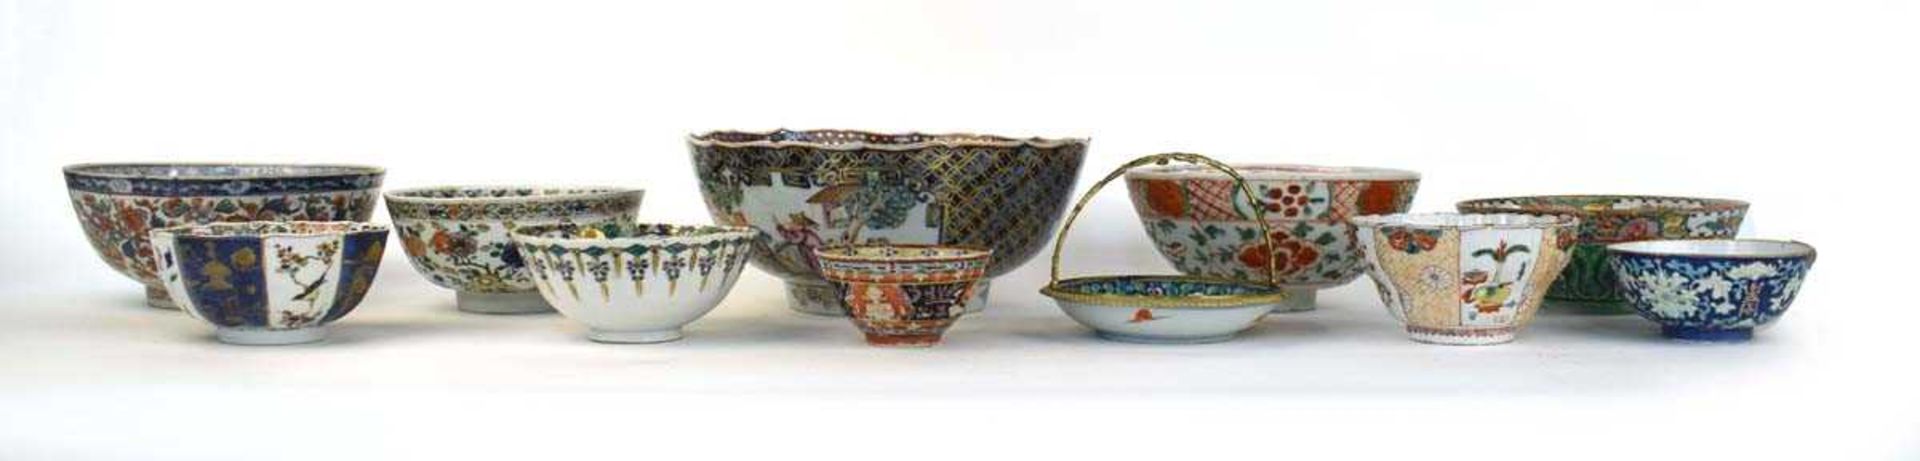 A Chinese Export bowl decorated in coloured enamels in the cabbage leaf pattern, d. 20.5 cm,